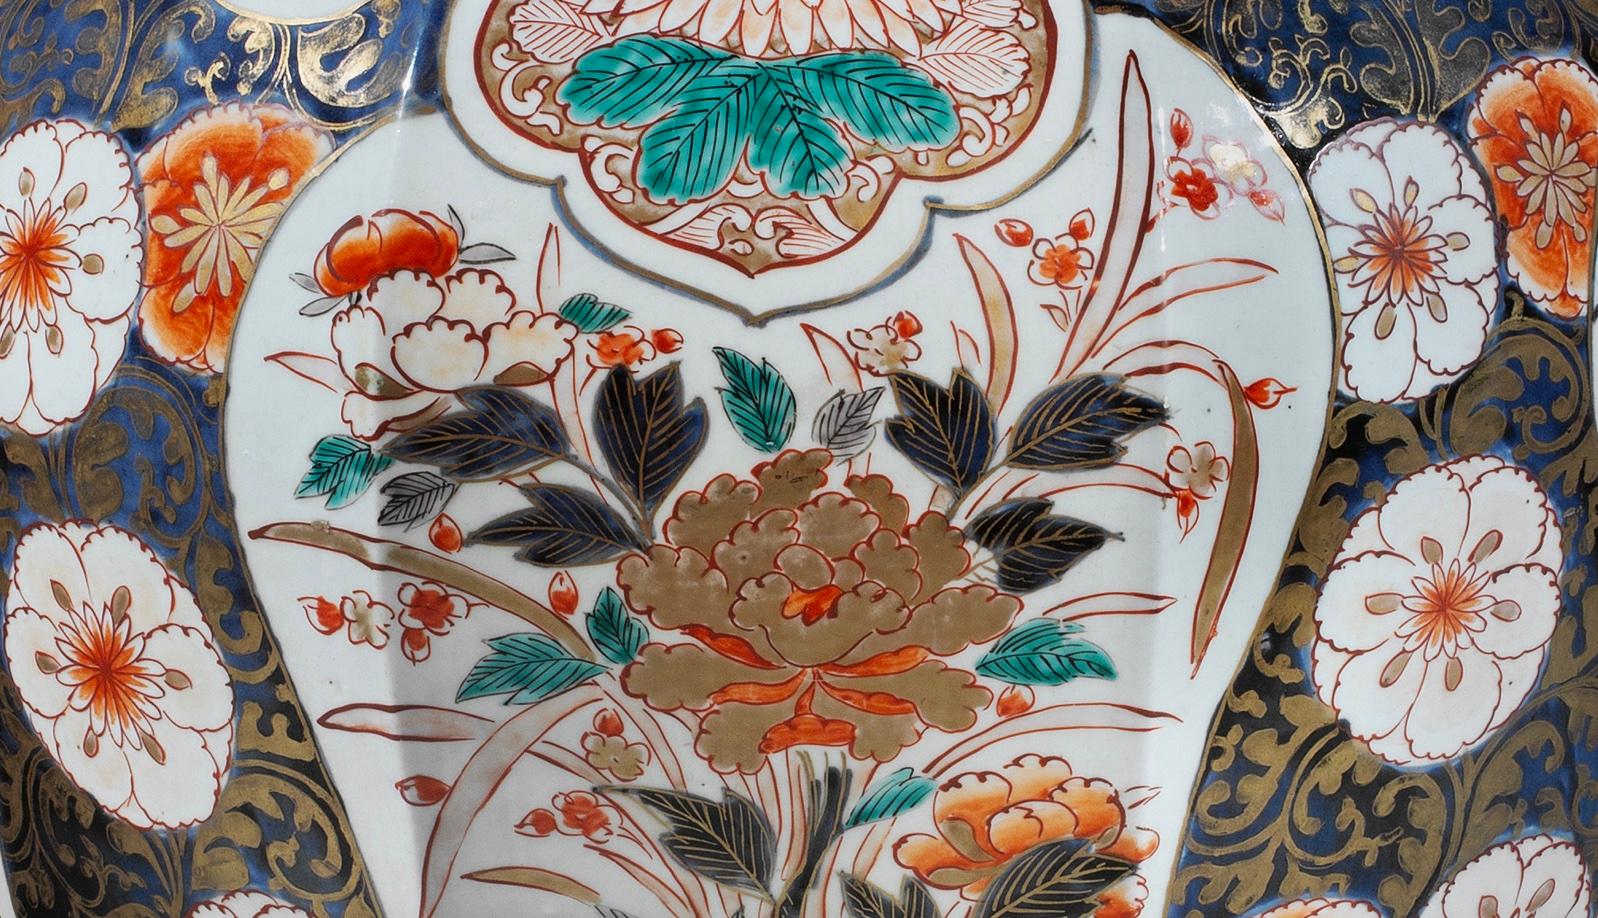 A magnificent large scale 18th century Imari vase of impressive porportions. The octagonal shaped vase wonderfully decorated throughout in the Imari palette of predominantly blues and iron reds on a white ground, with gilded highlights. With shaped